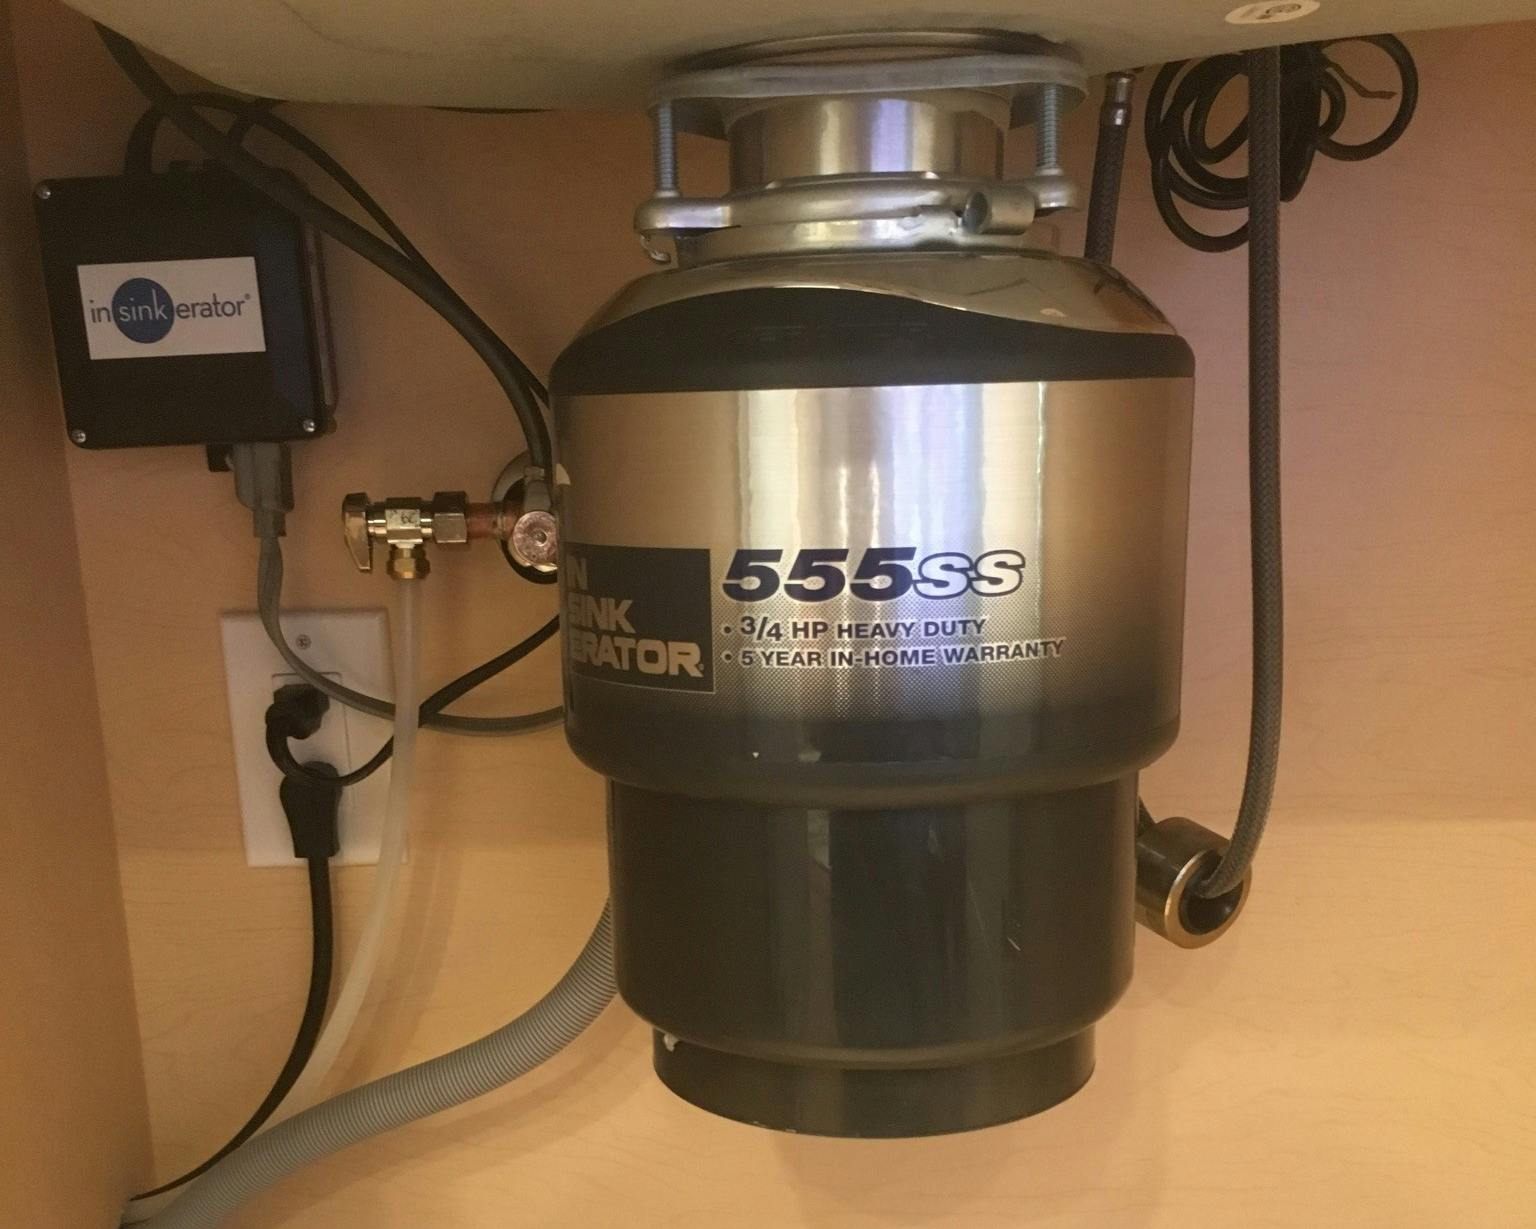 A close-up view of an 'InSinkErator' garbage disposal unit, model 555ss, boasting 3/4 HP heavy-duty performance with a 5-year in-home warranty label. The unit is mounted under a sink with a black power box labeled 'insinkerator' to its left, and various cords and tubes connected.